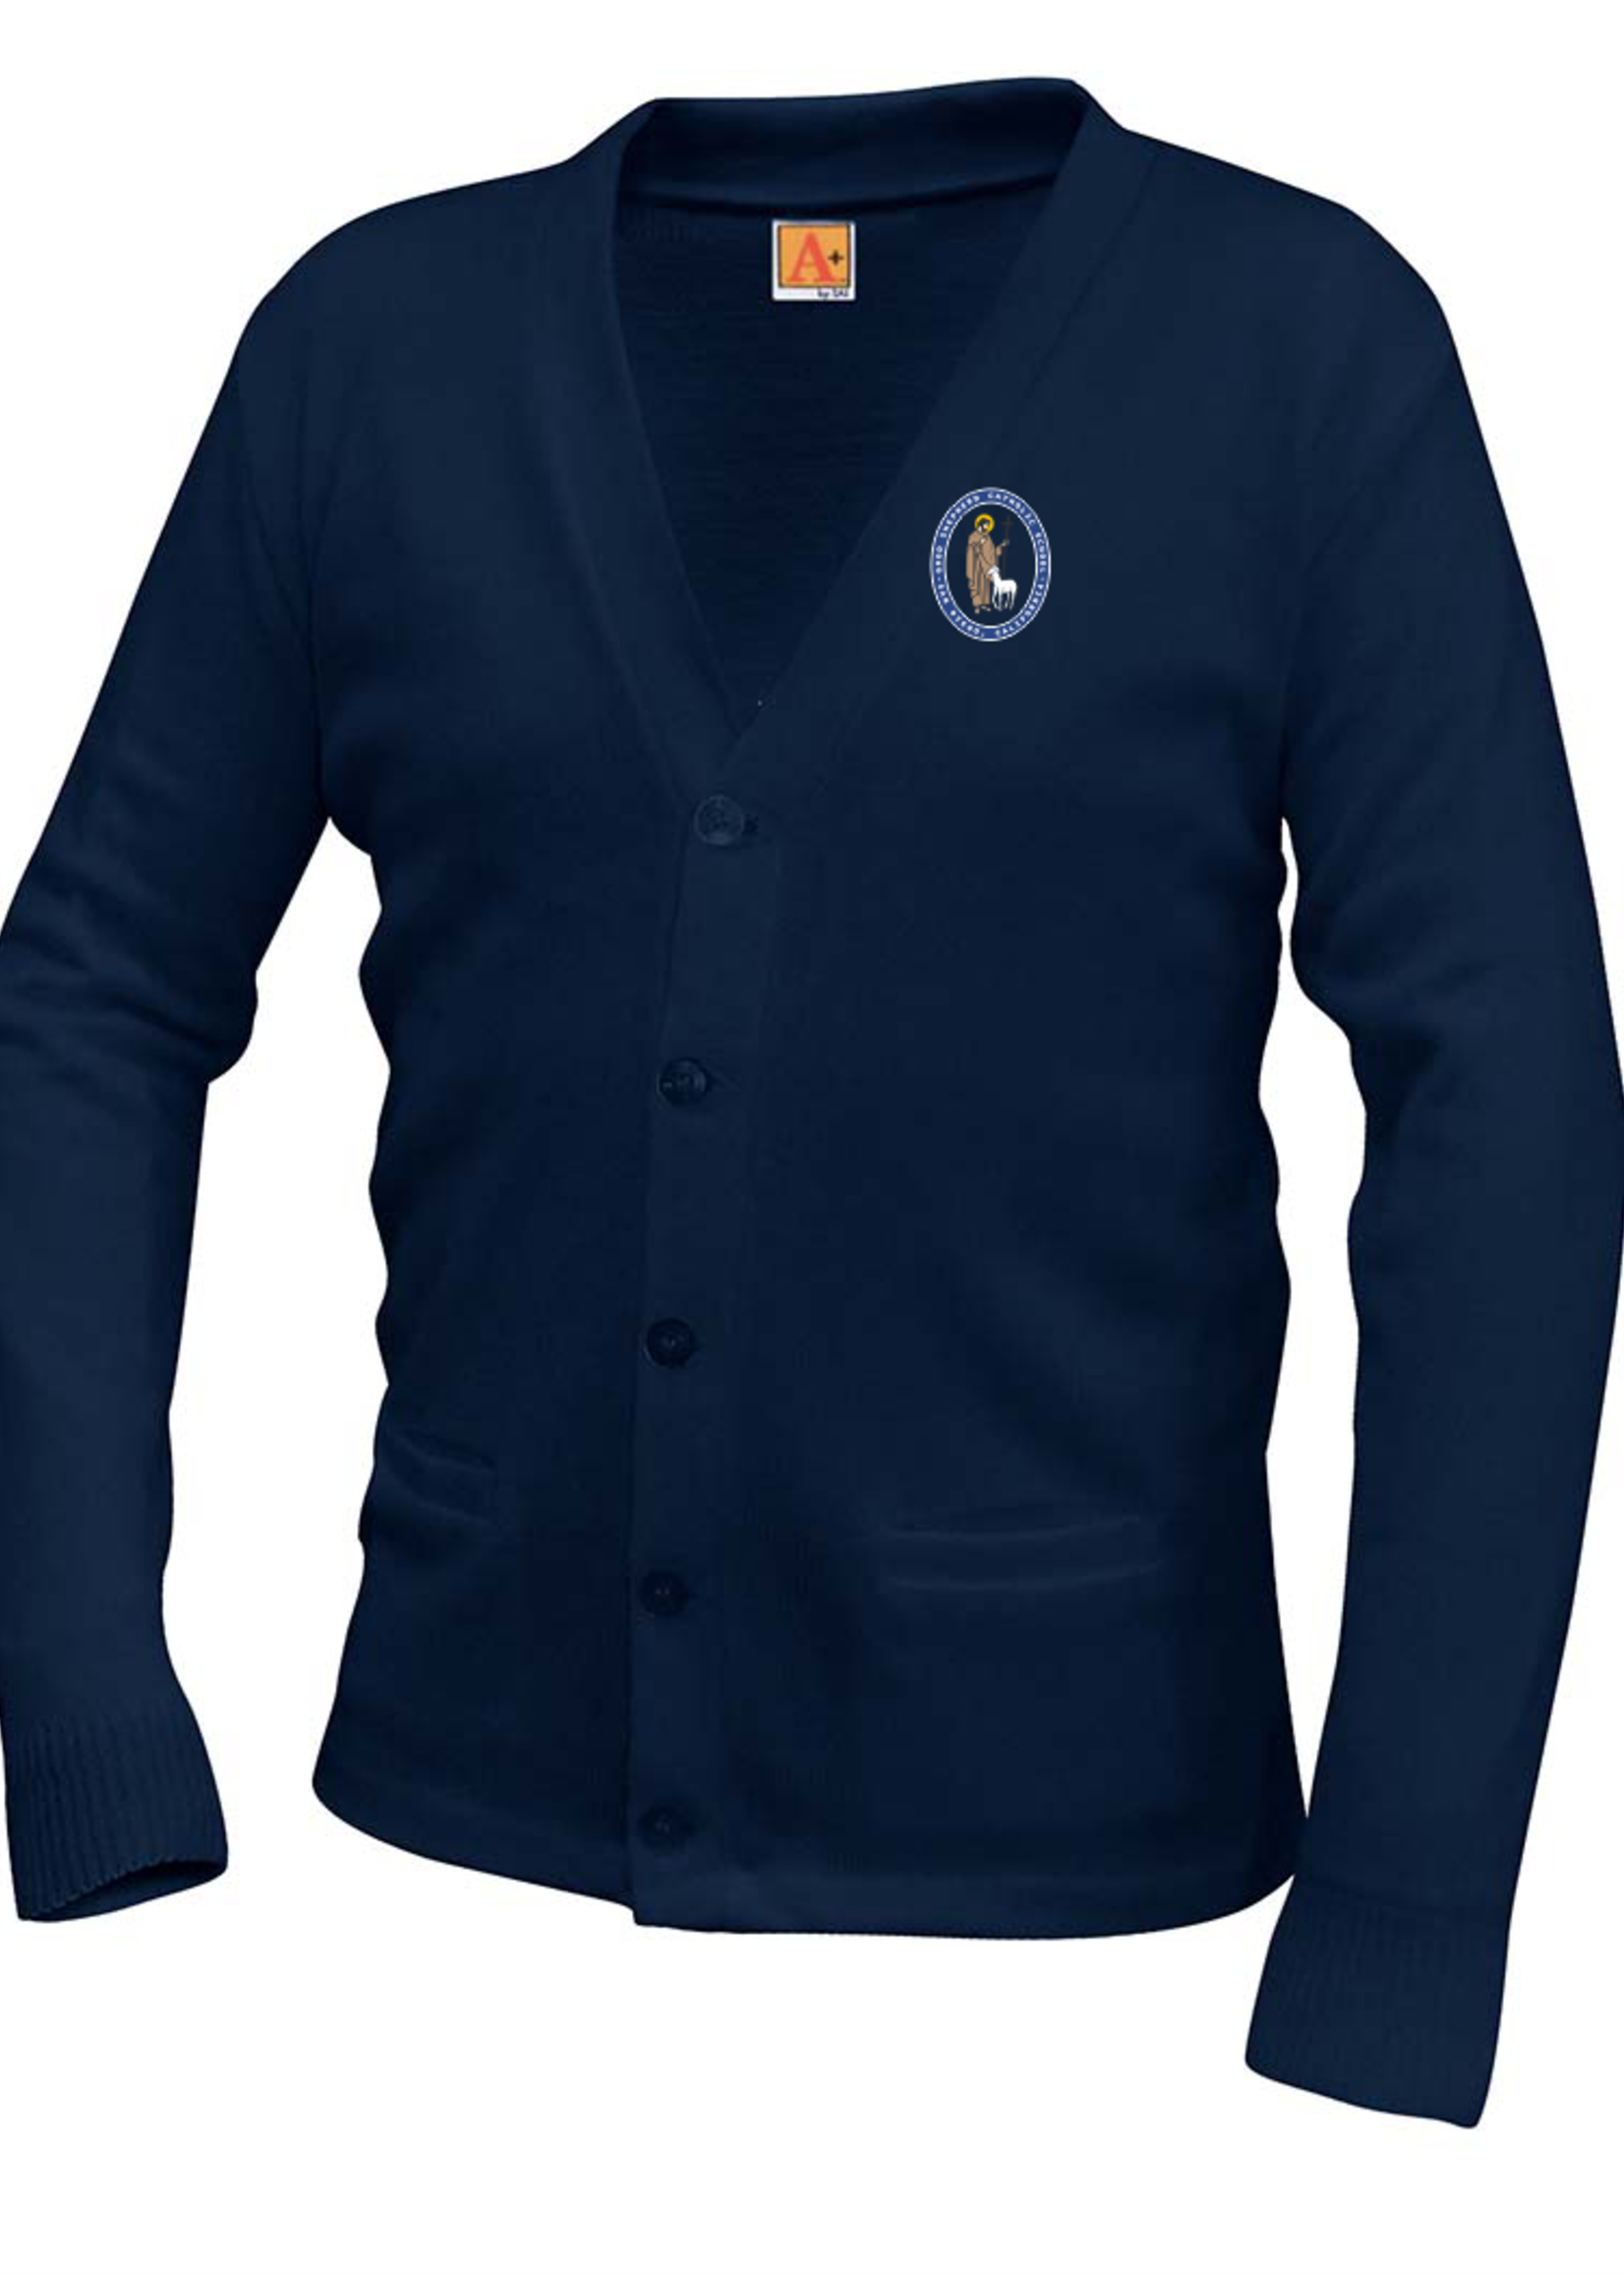 GSCS Navy V-neck cardigan sweater with pockets